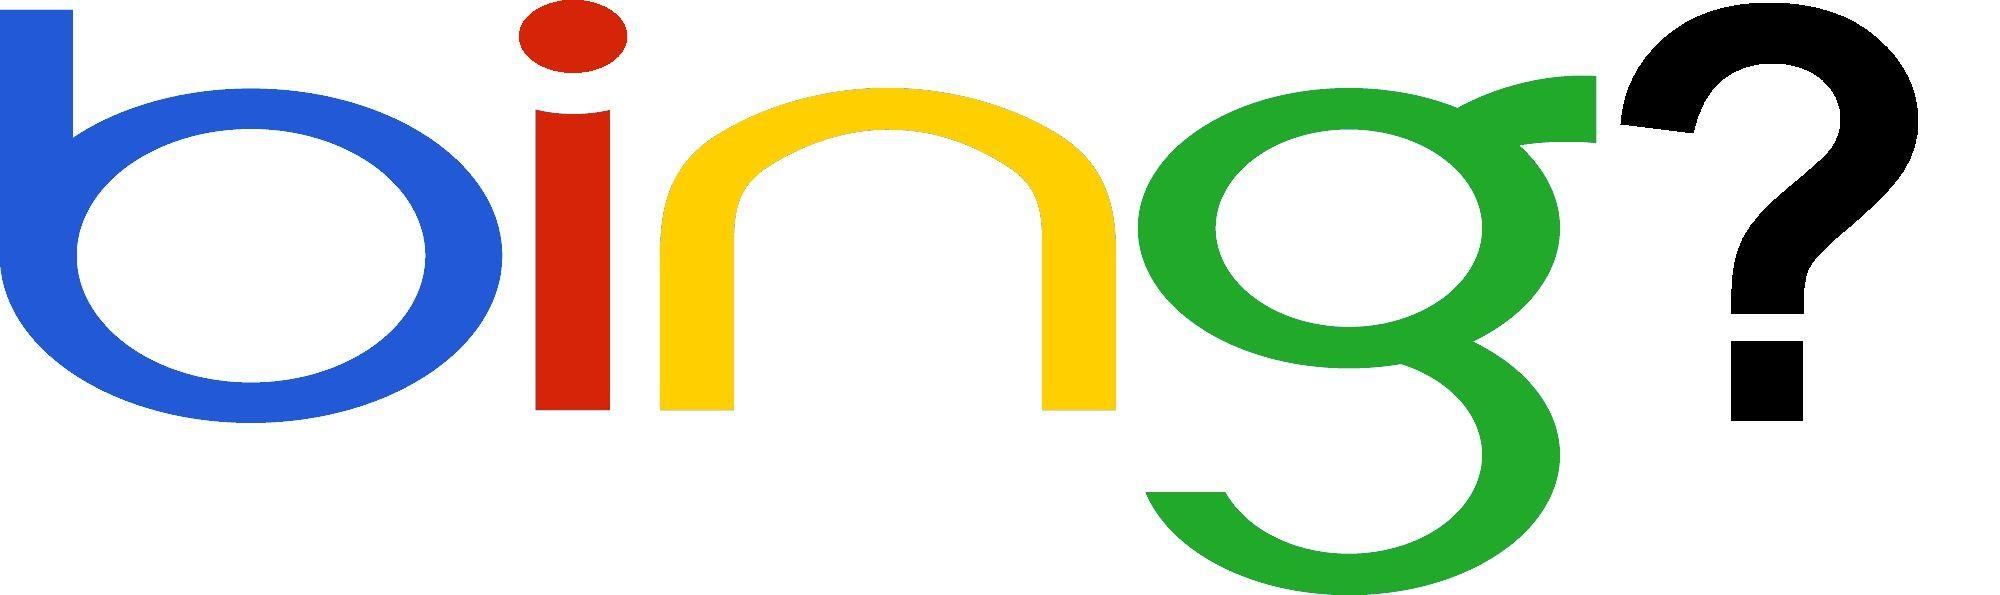 Bing First Logo - bing-logo-with-google-colors-question-mark |